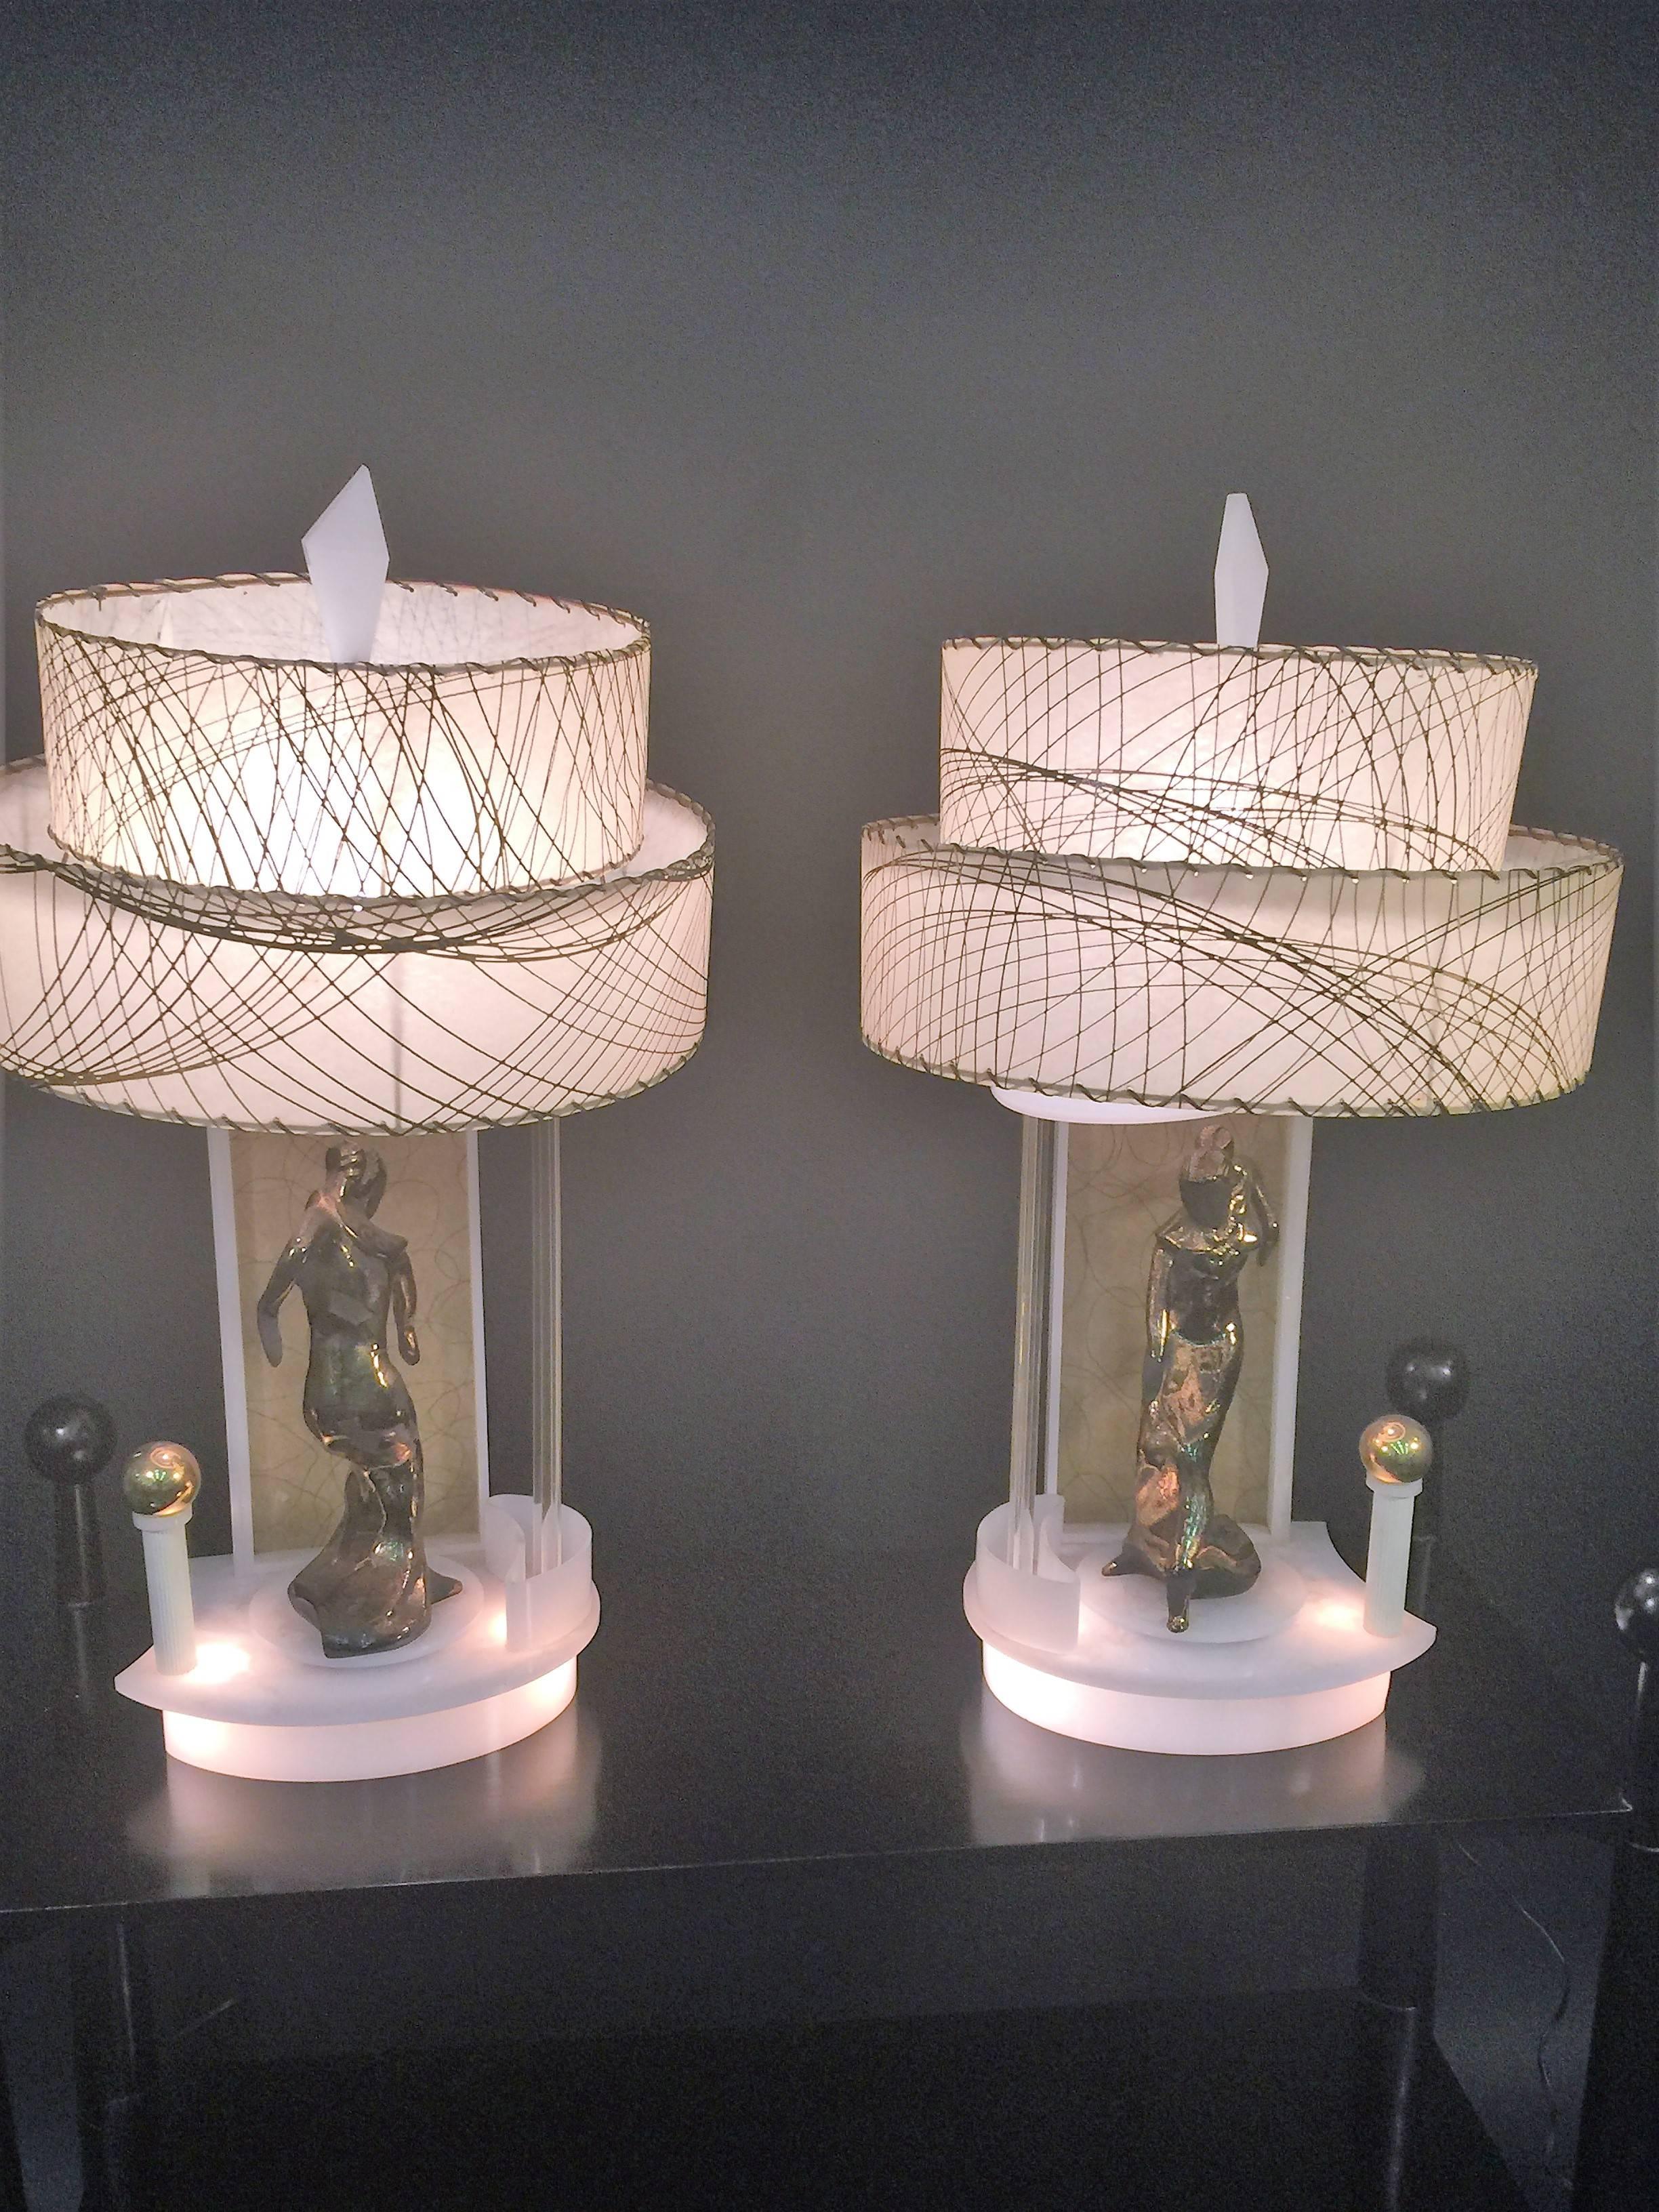 These really cool lamps are made of white Lucite and clear Lucite rods. The gold swirled parchment paper background are the backdrop for the metallic bronze, glossy and flat black glazed ceramic dancers. These lamps have motorized bases for the